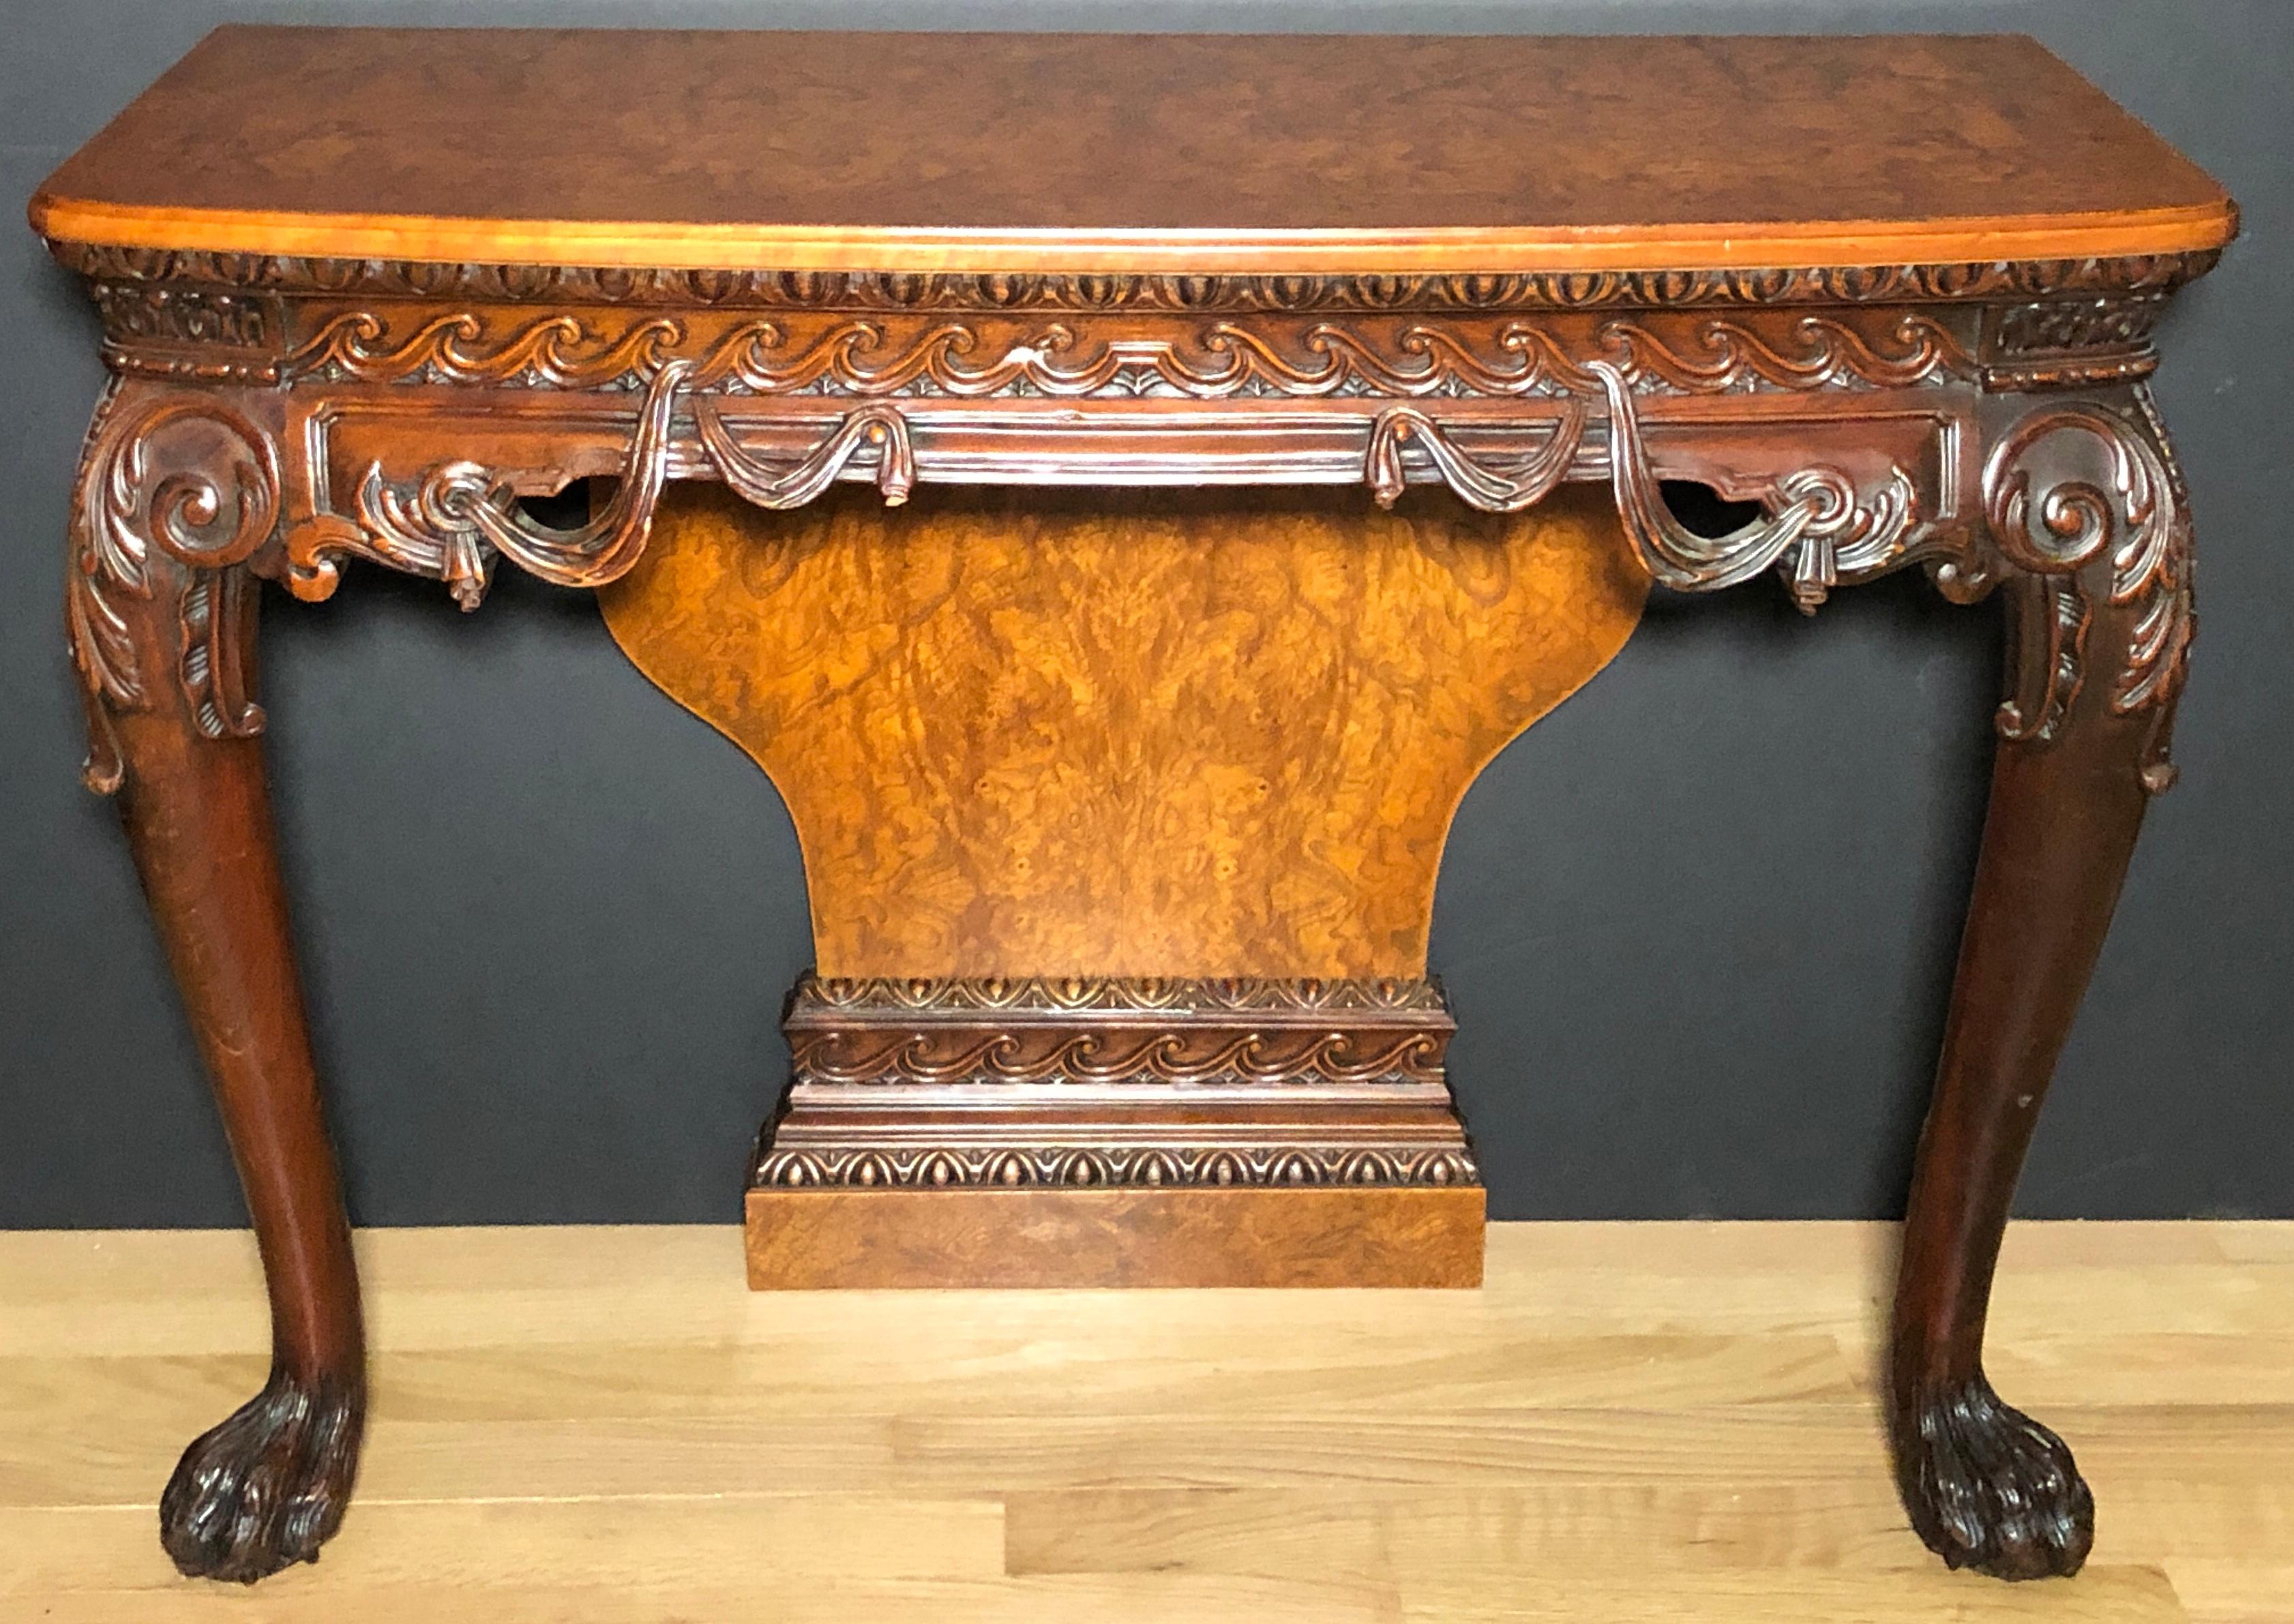 A fine pair of carved console tables manner of William Kent, 19th century carved console tables with bookmatched and crossbanded burl wood tops and backs. Carved gallery with swags and waves and acanthus leaves. With lion paw feet.